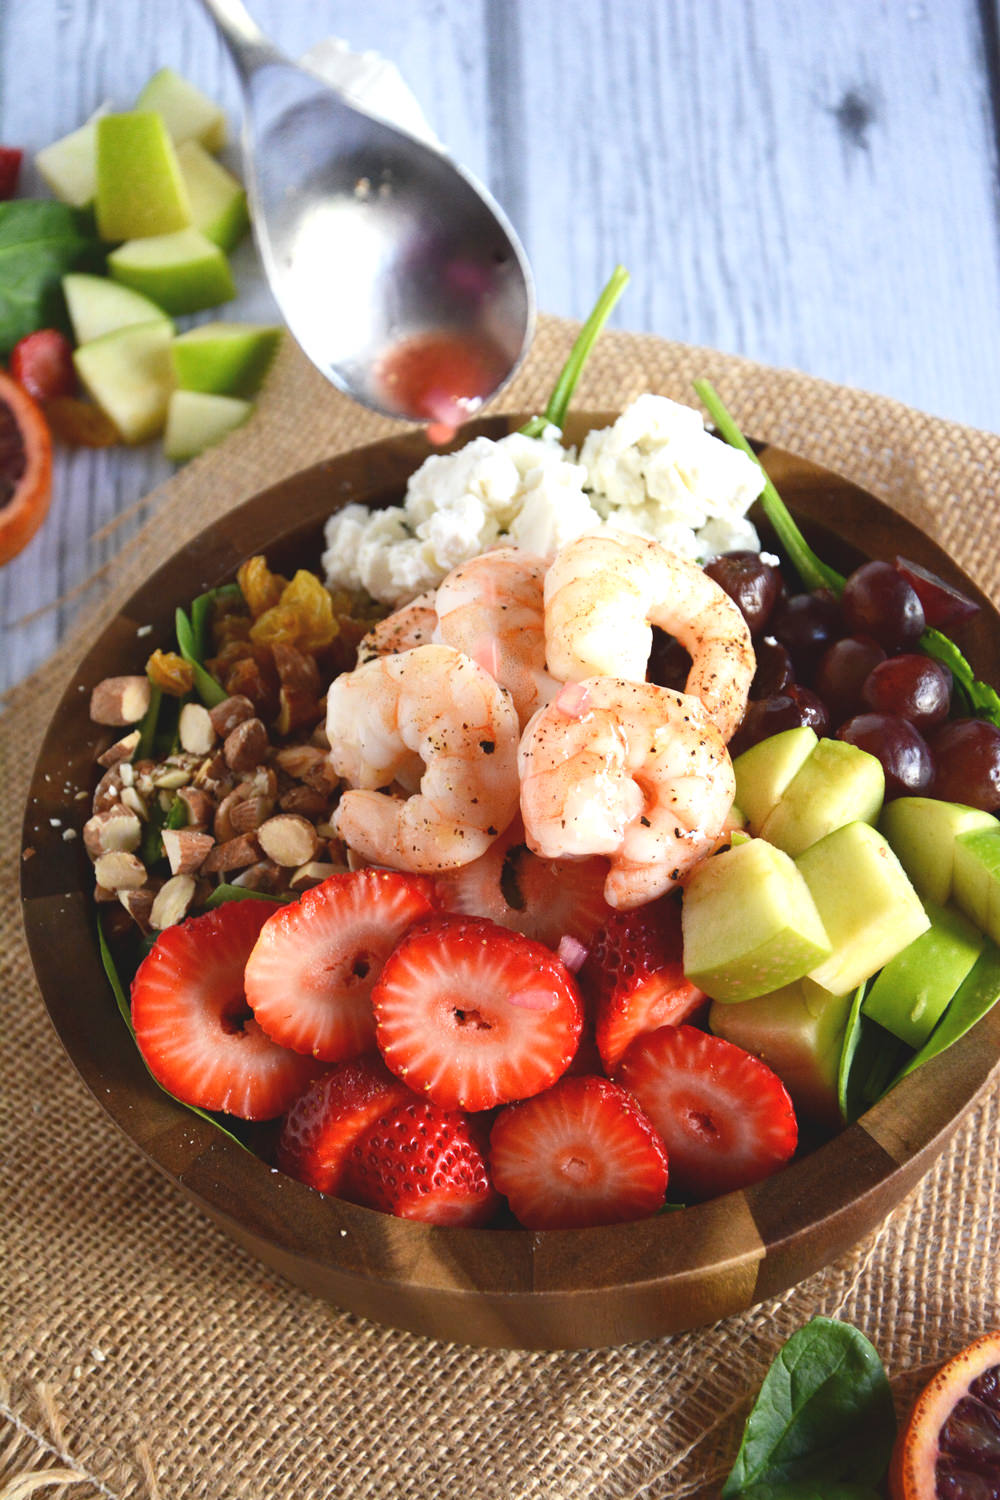 A vibrant salad with roasted shrimp, packed with fresh fruit, creamy goat cheese and roasted almonds and topped with a sweet citrus dressing made from blood oranges and sweetened with honey. This salad is colorful, healthy, and delicious!